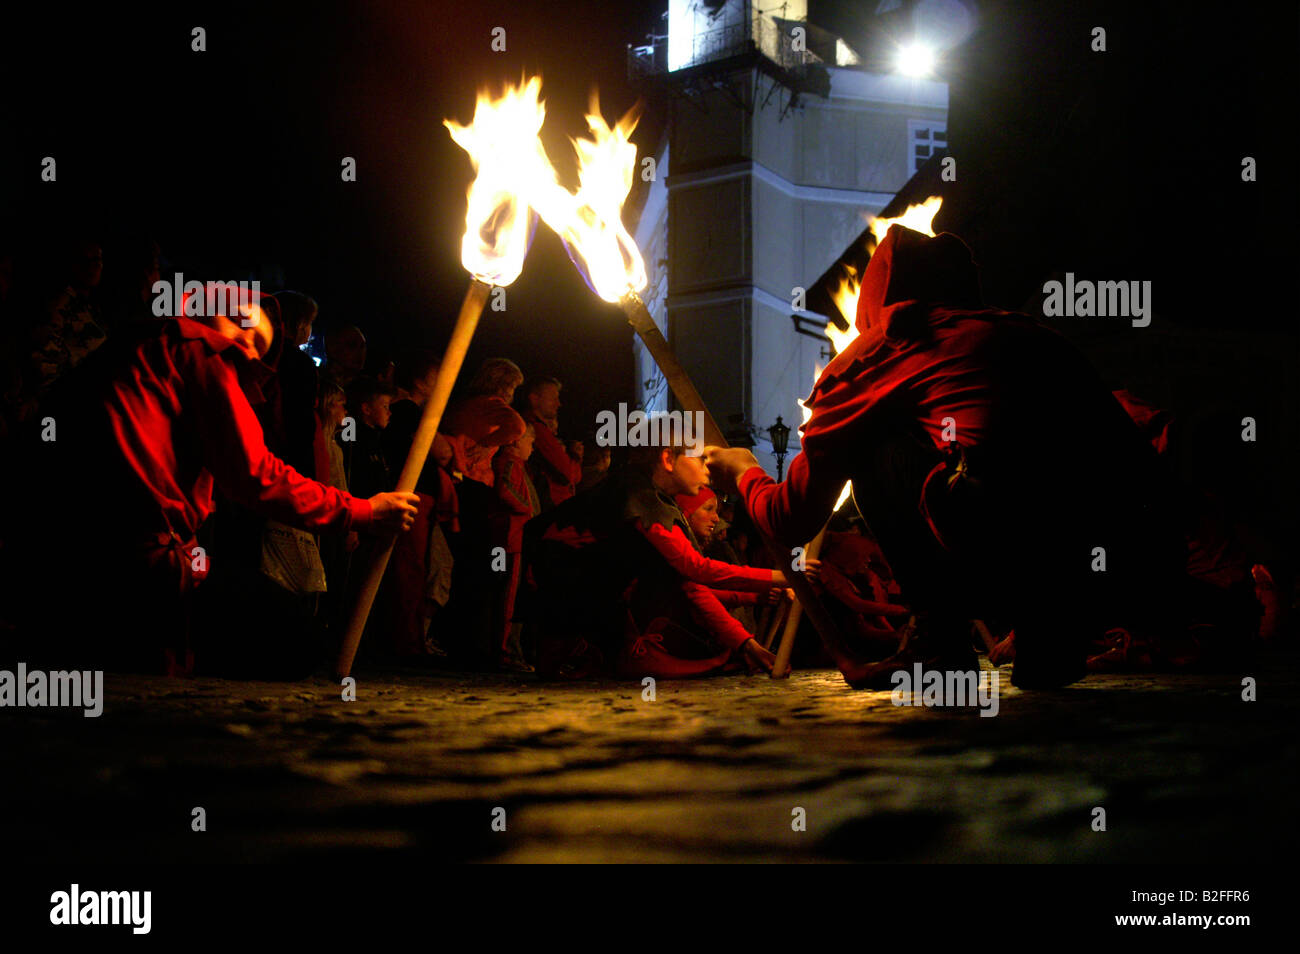 Two men in historic costumes with burning torches at night street in medieval Banska Stiavnica town, festival, Slovakia summer Stock Photo